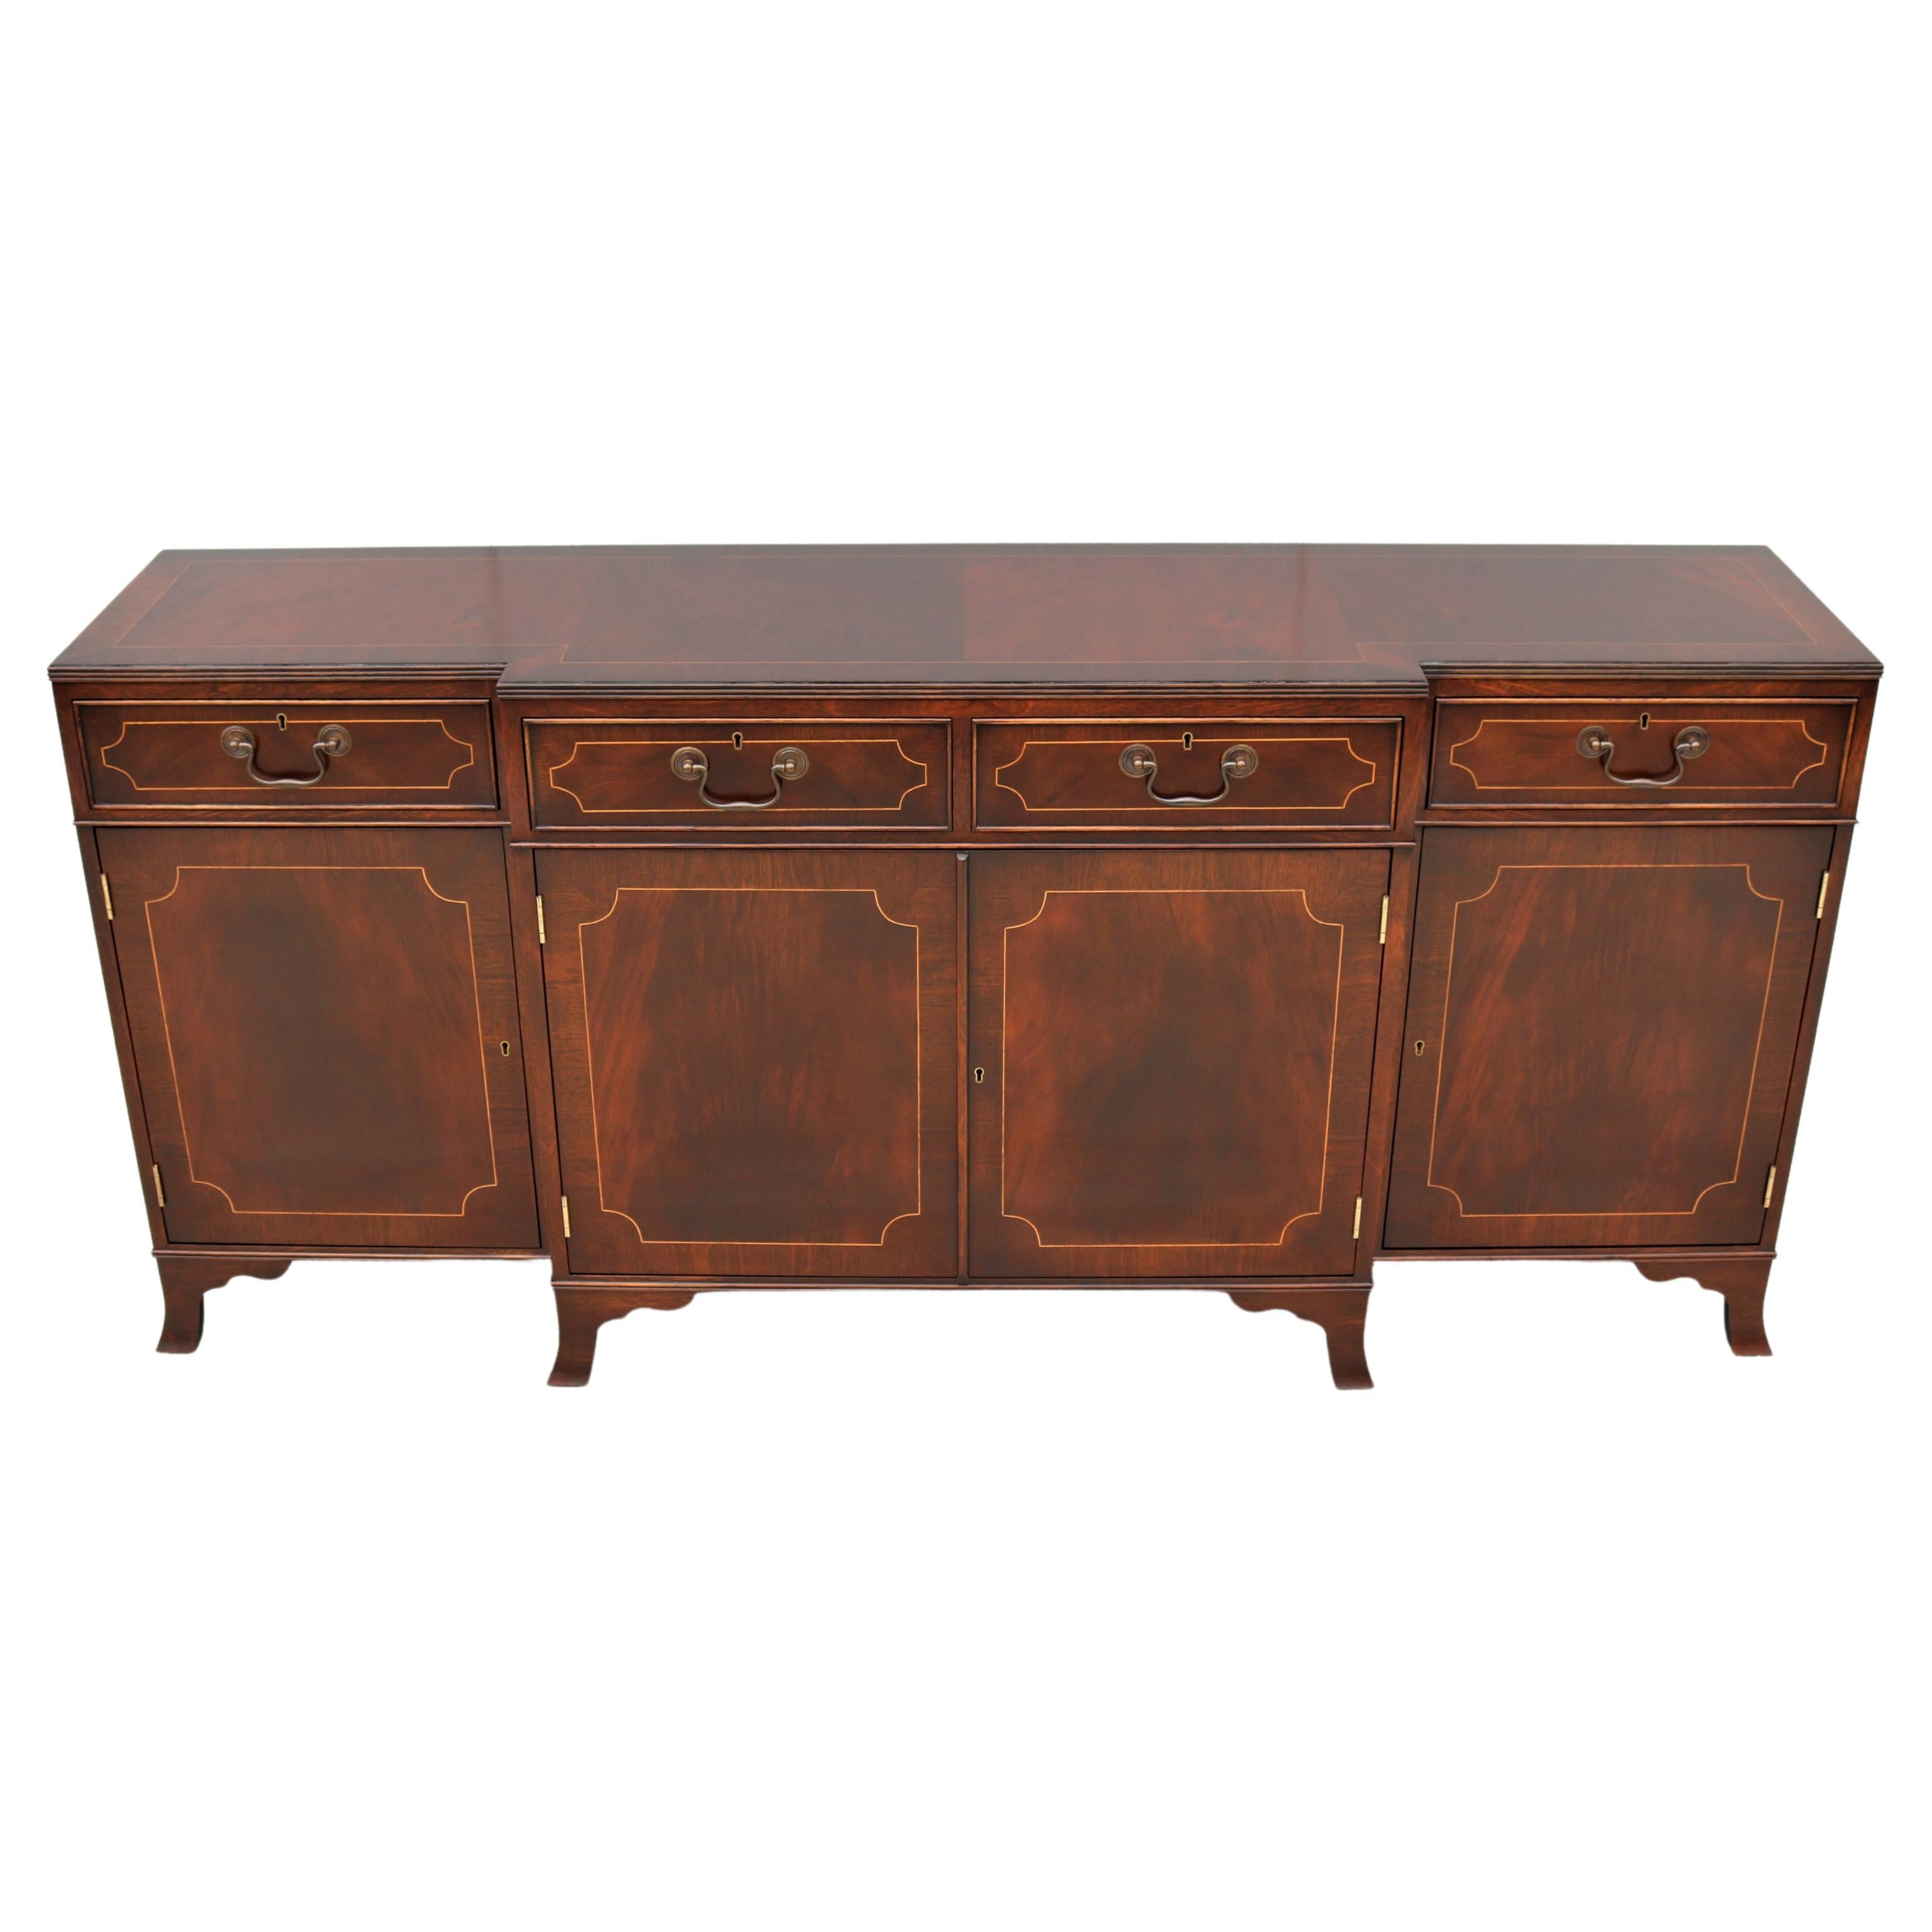 Vintage Traditional Trosby Furniture English Sheraton Style Breakfronted Cabinet For Sale